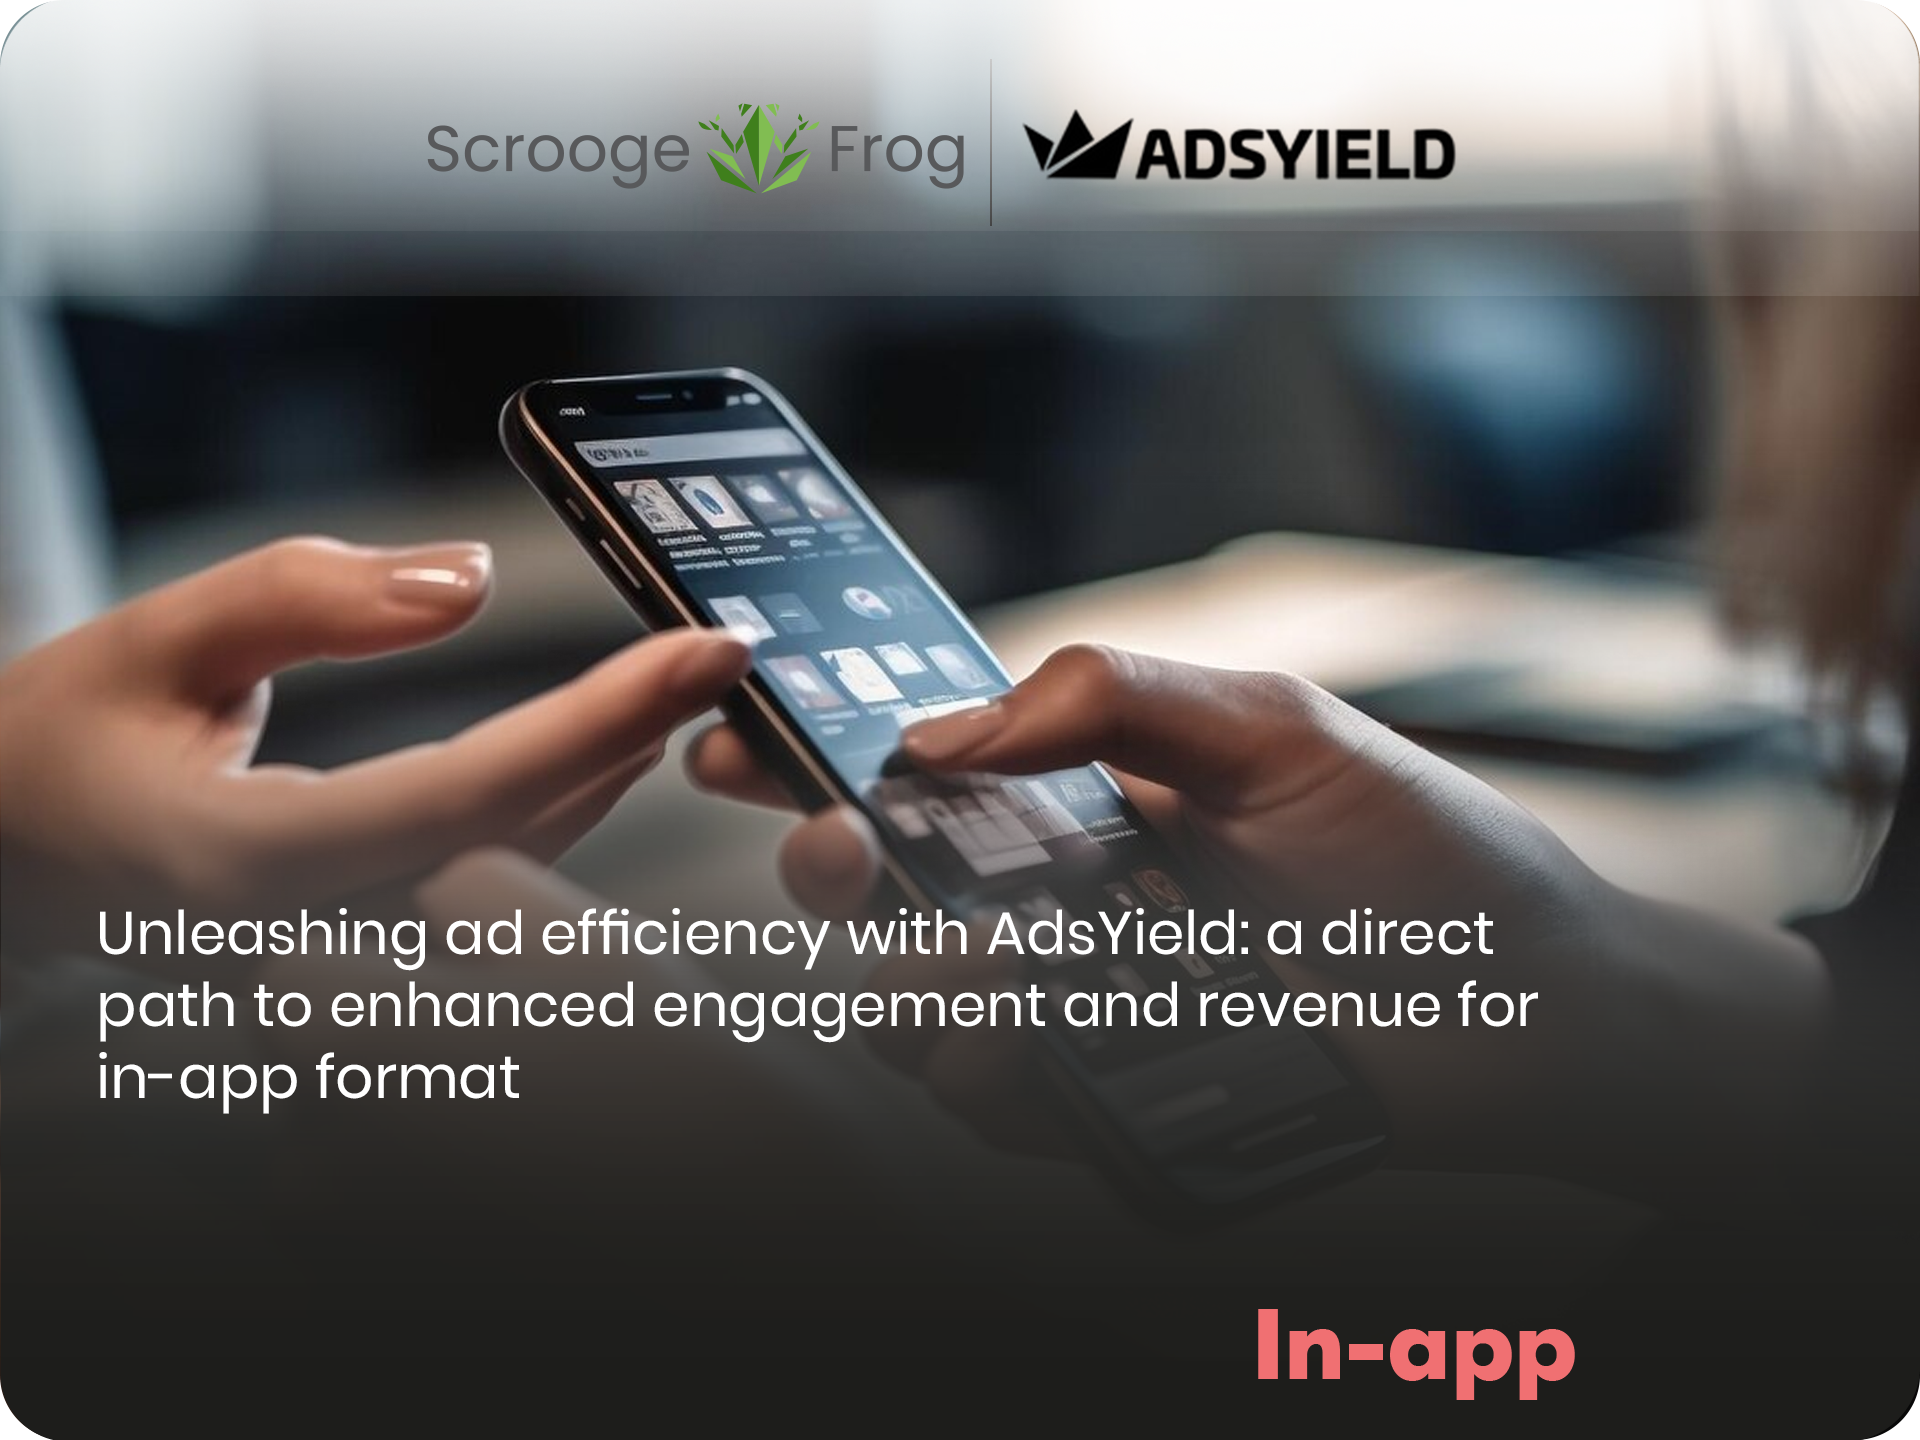 Unleashing ad efficiency with AdsYield: a direct path to enhanced engagement and revenue for in-app format